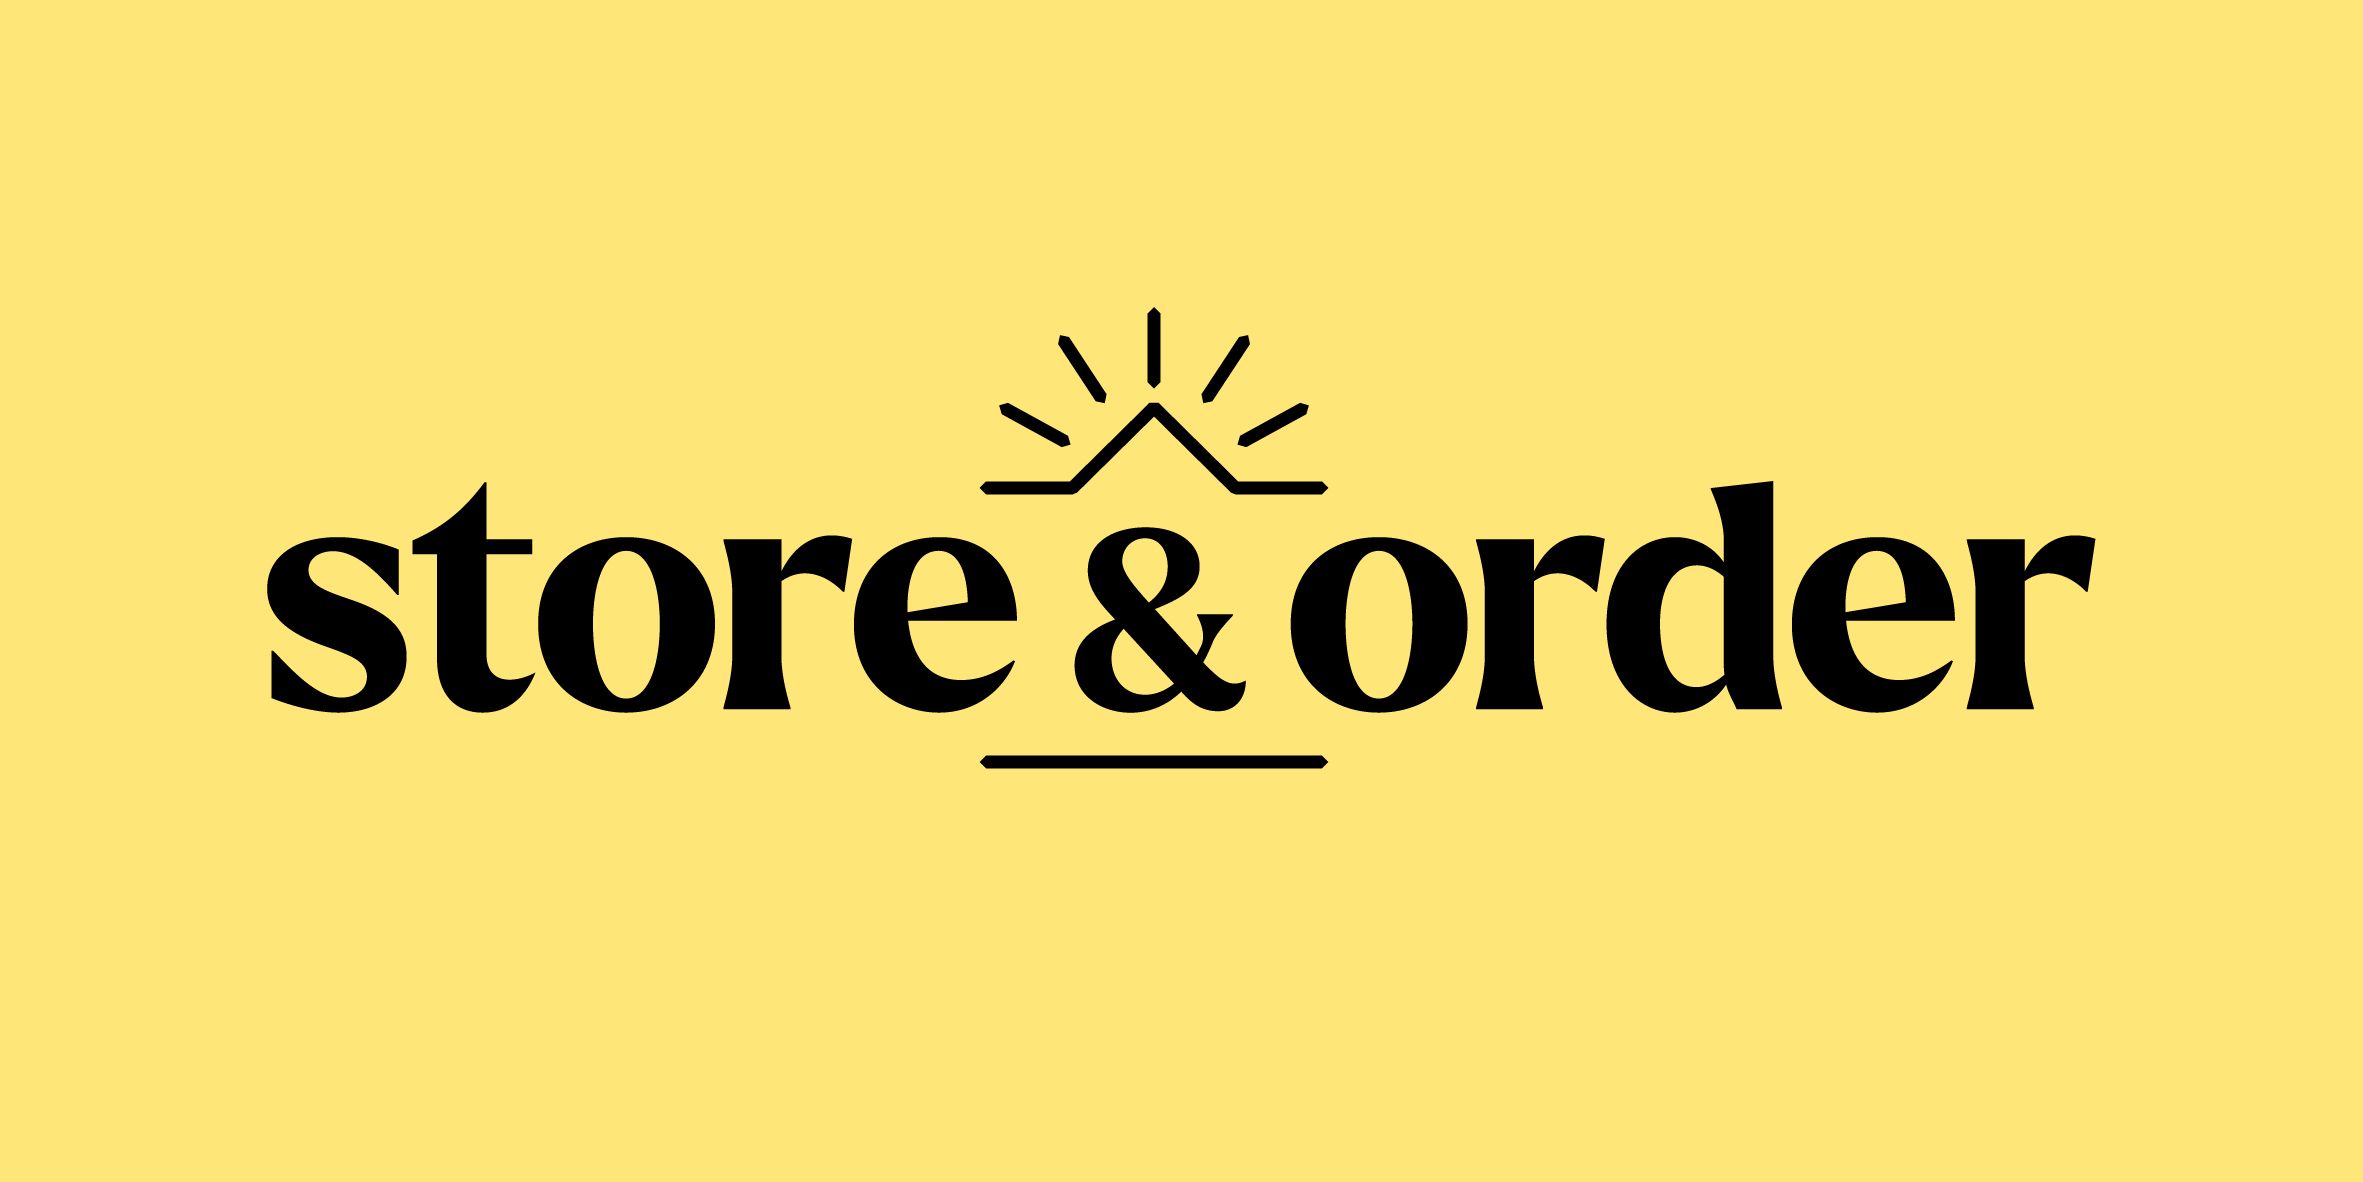 Store & order